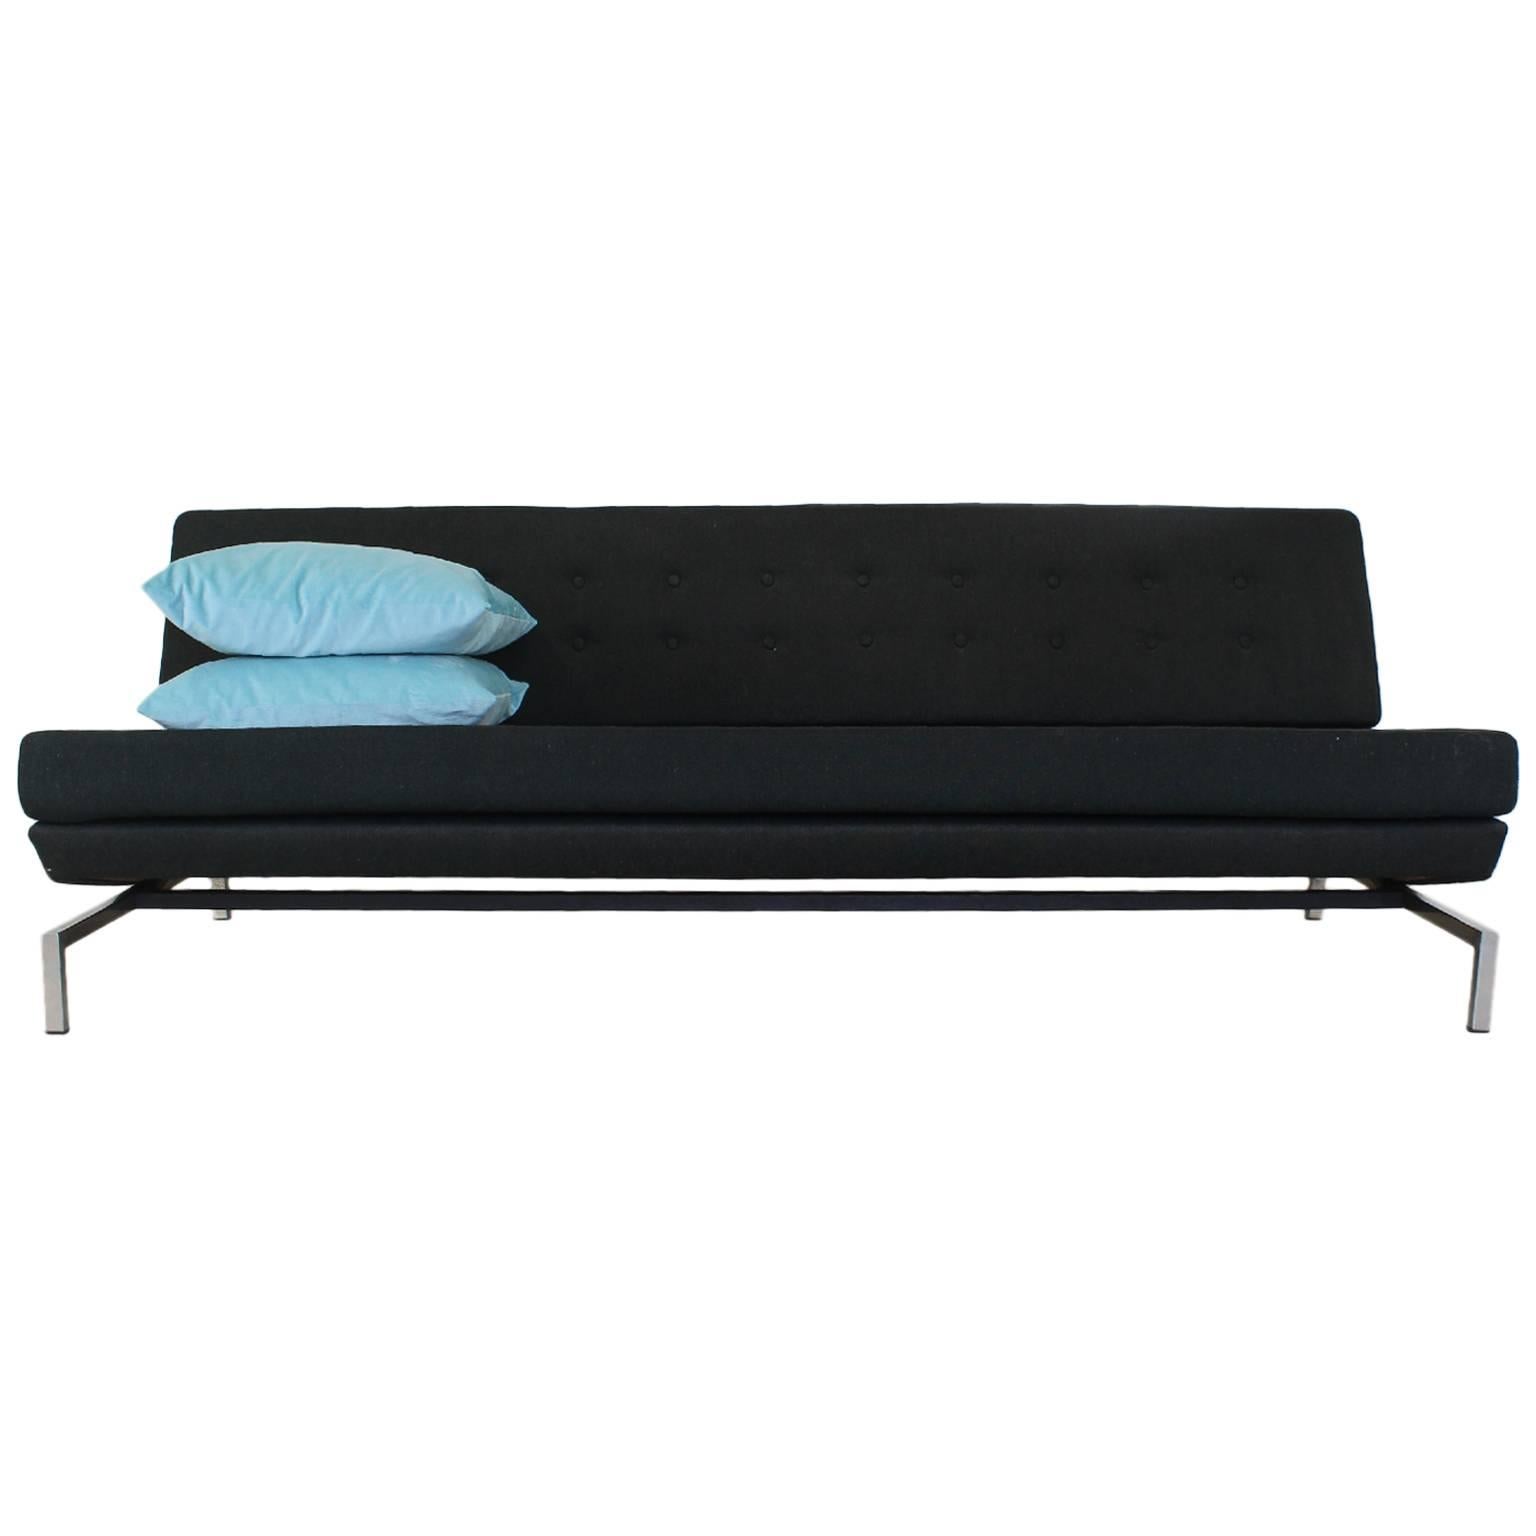 Belgian Design Sit Sleeping Couch for Beaufort For Sale